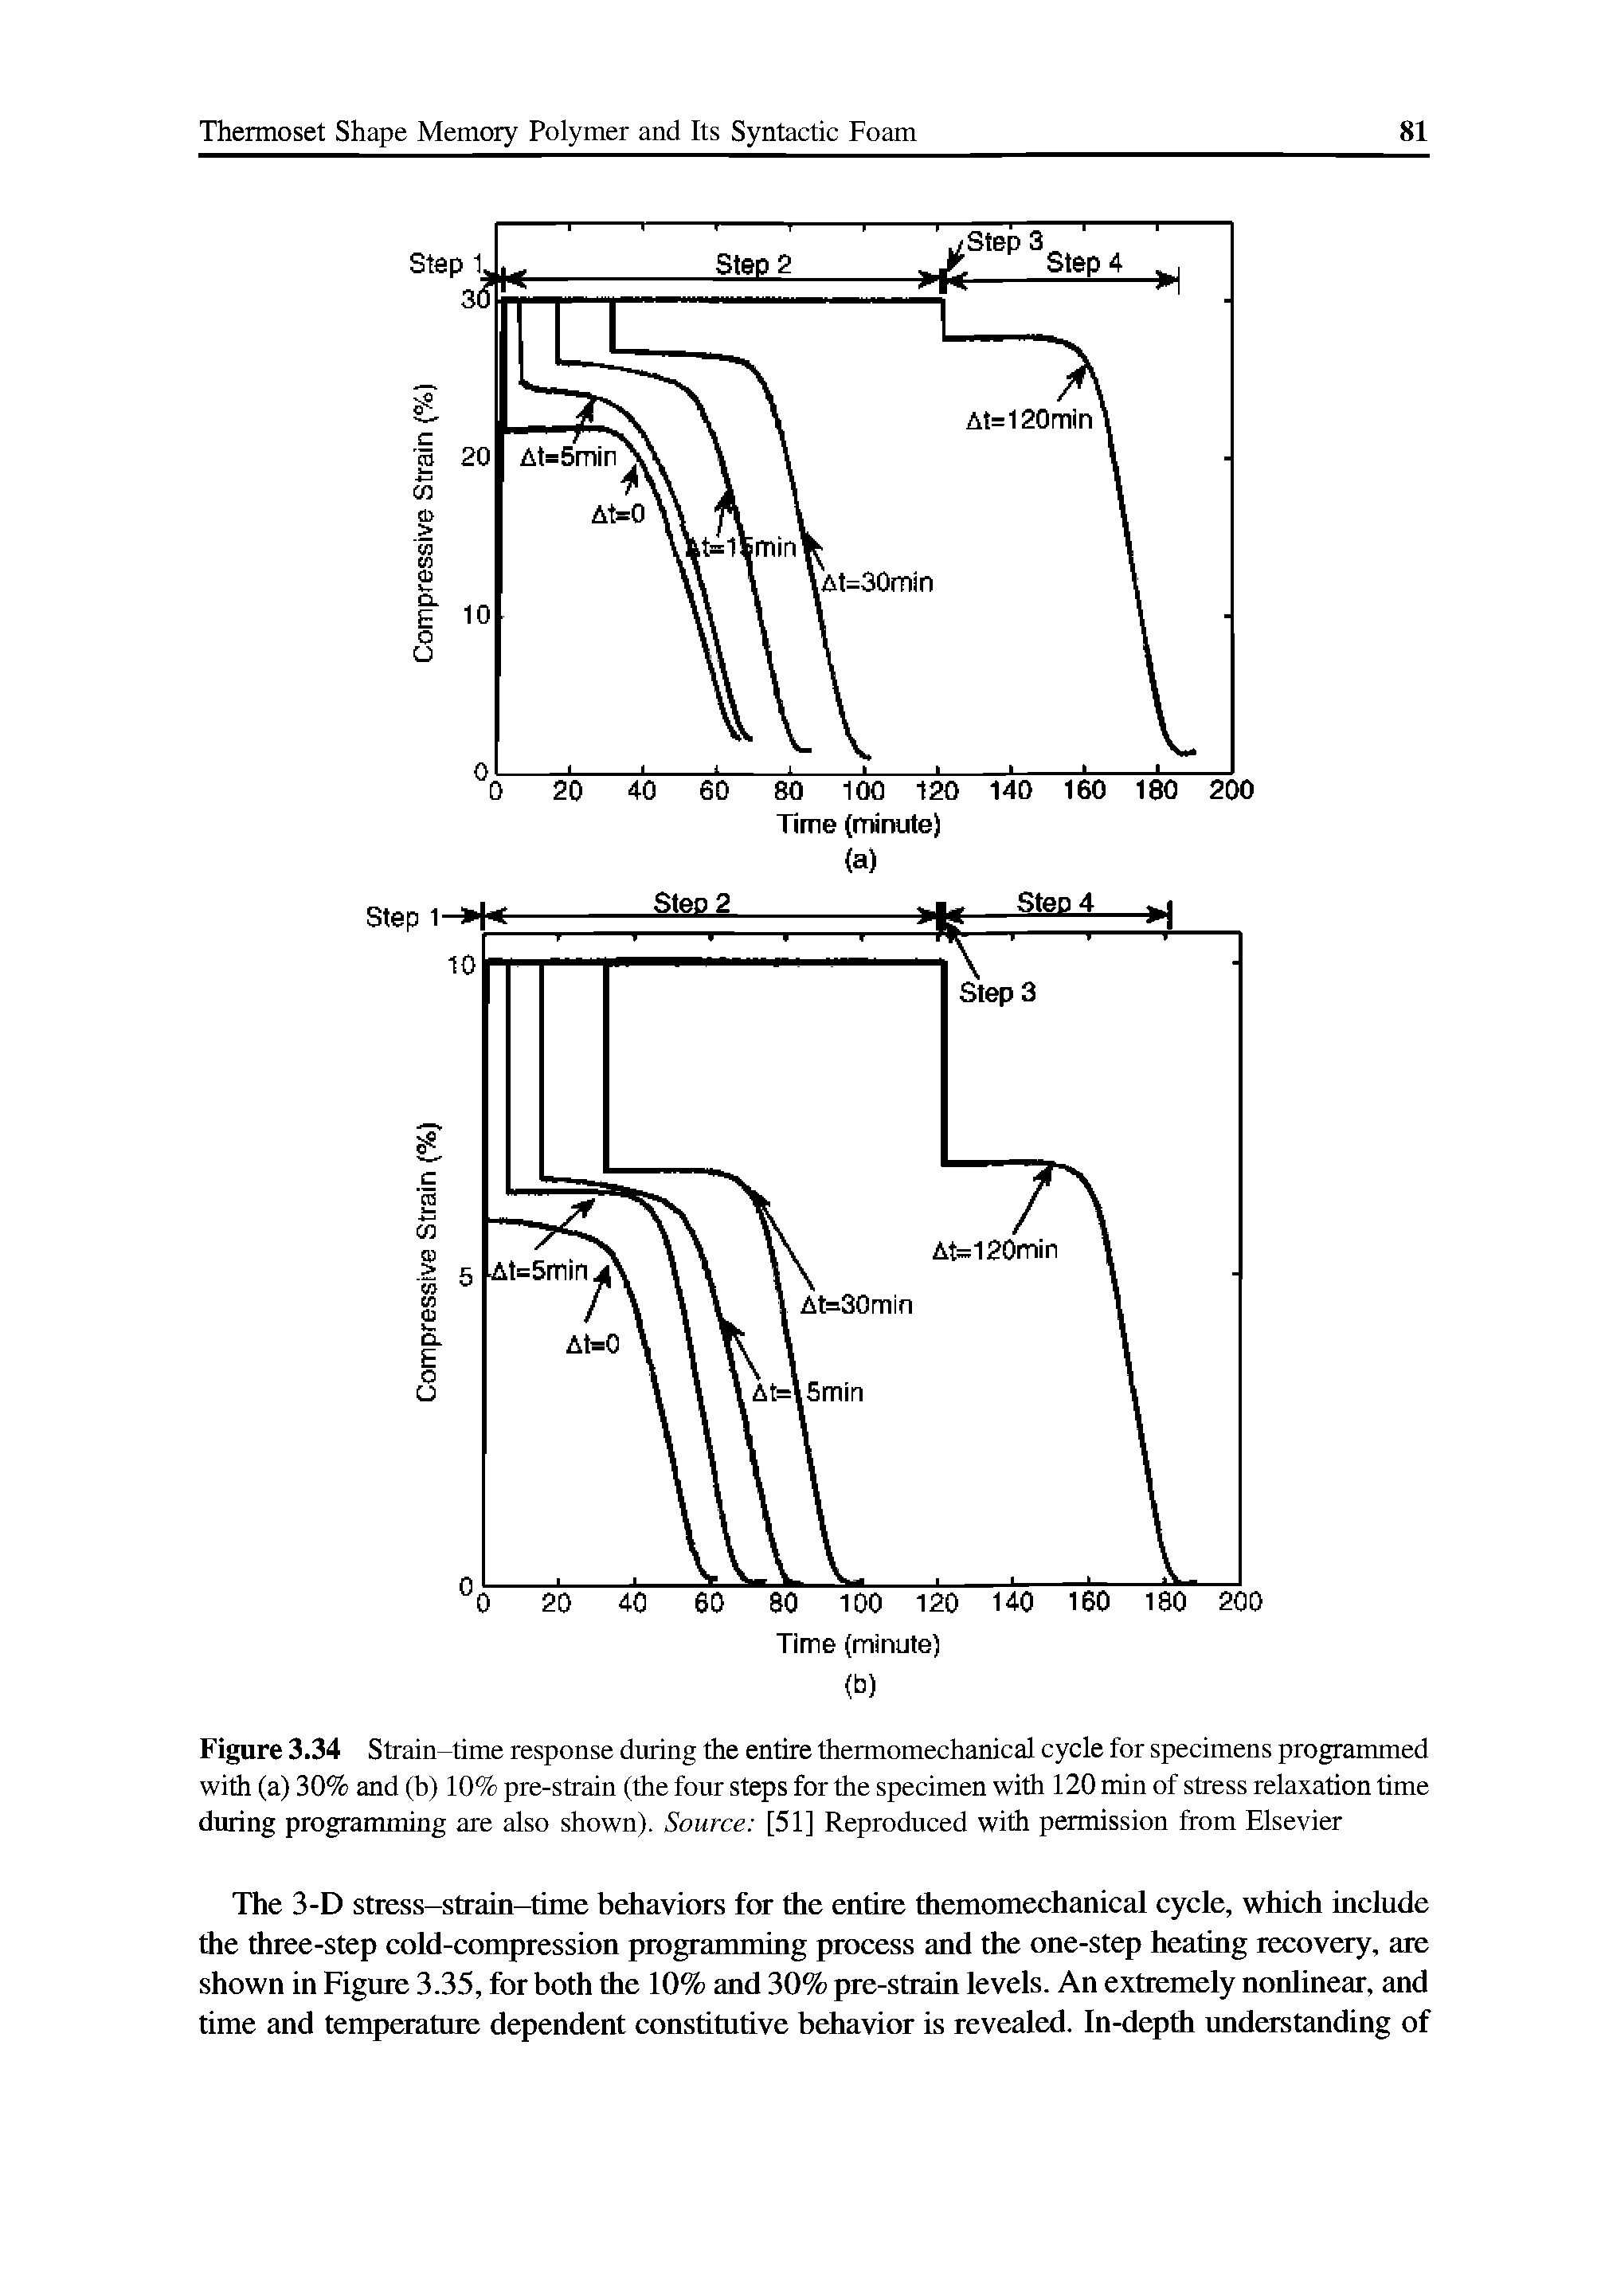 Figure 3.34 Strain-time response during the entire thermomechanical cycle for specimens programmed with (a) 30% and (b) 10% pre-strain (the four steps for the specimen with 120 min of stress relaxation time during programming are also shown). Source [51] Reproduced with permission from Elsevier...